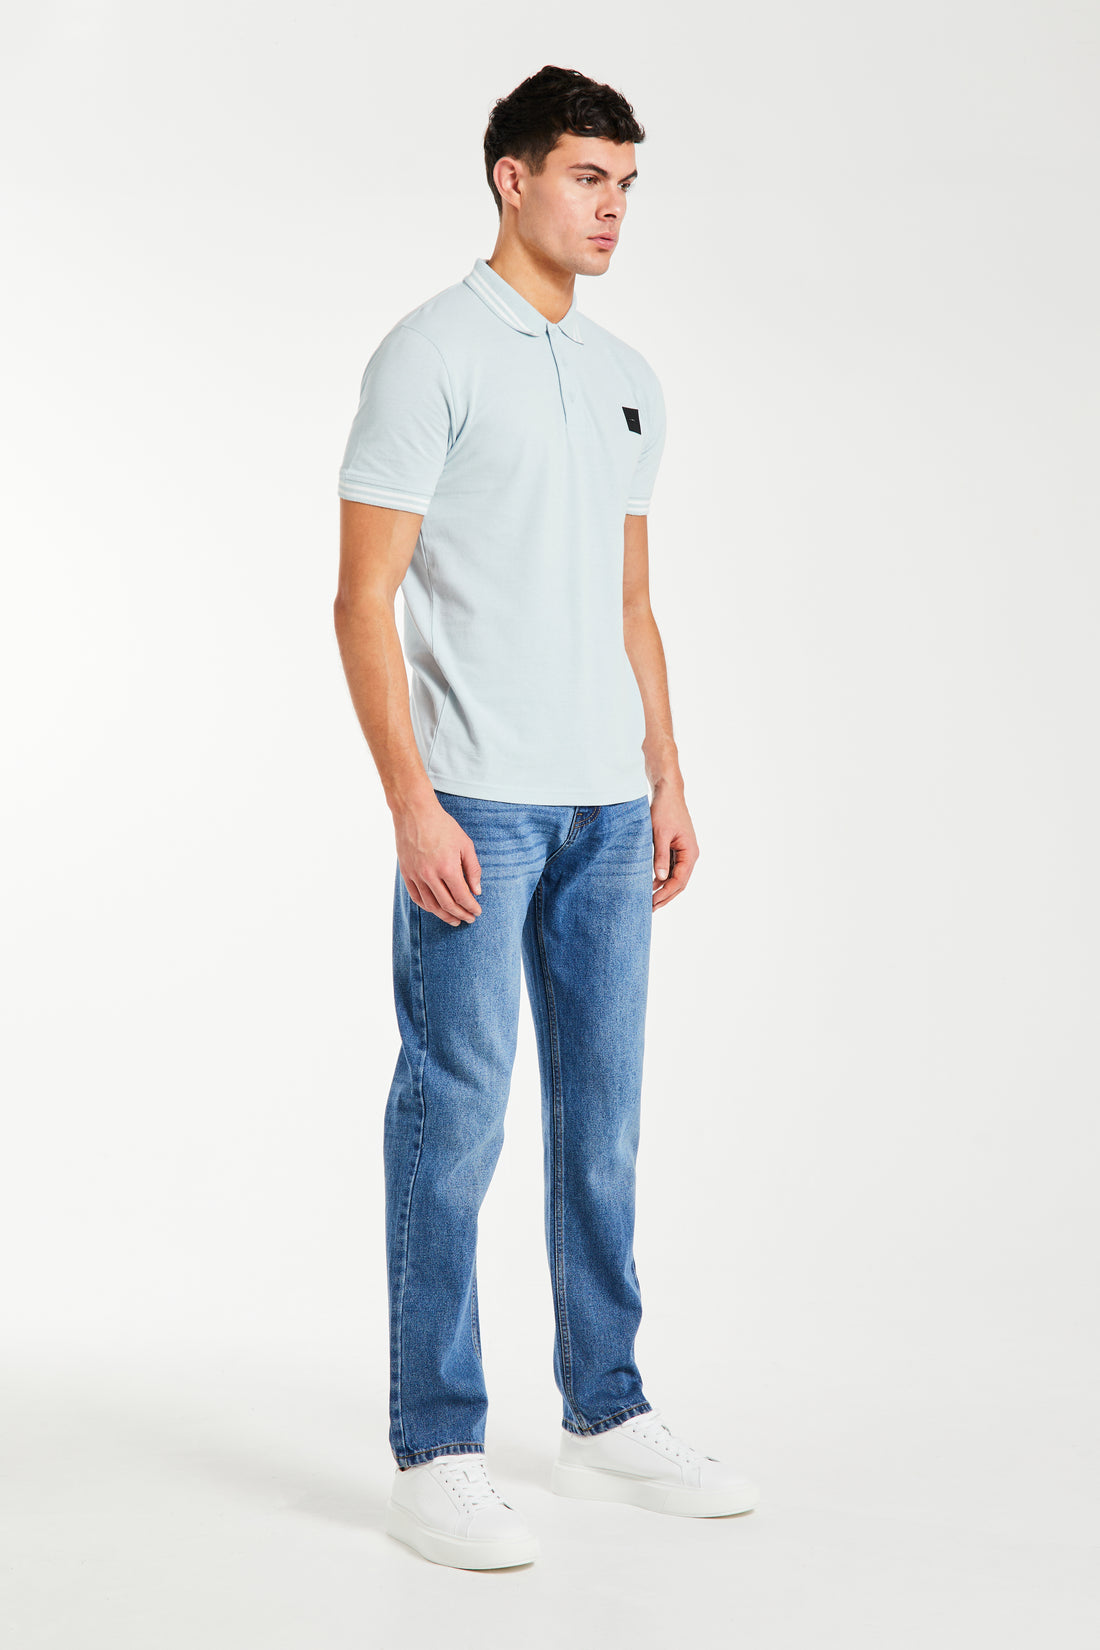 men's polo shirt sale in blue styled with jeans